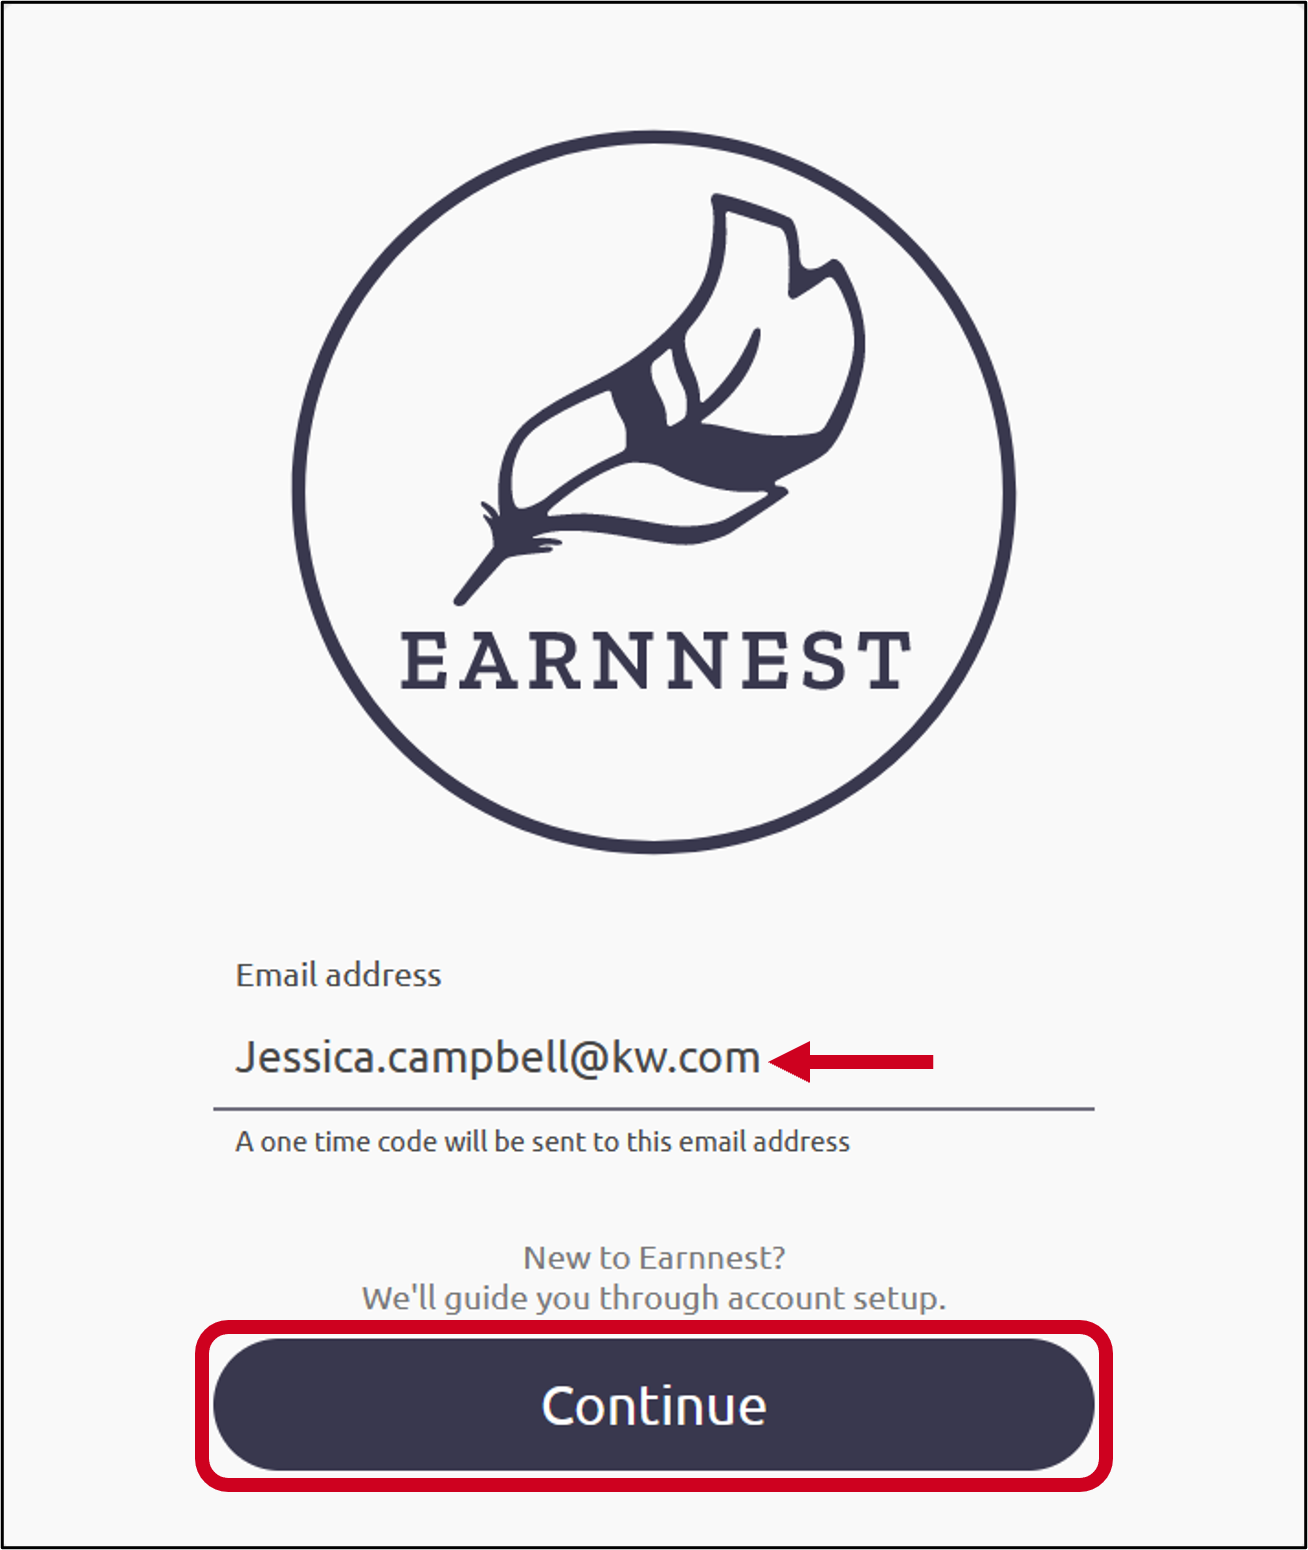 earnnest_signin_continue.png